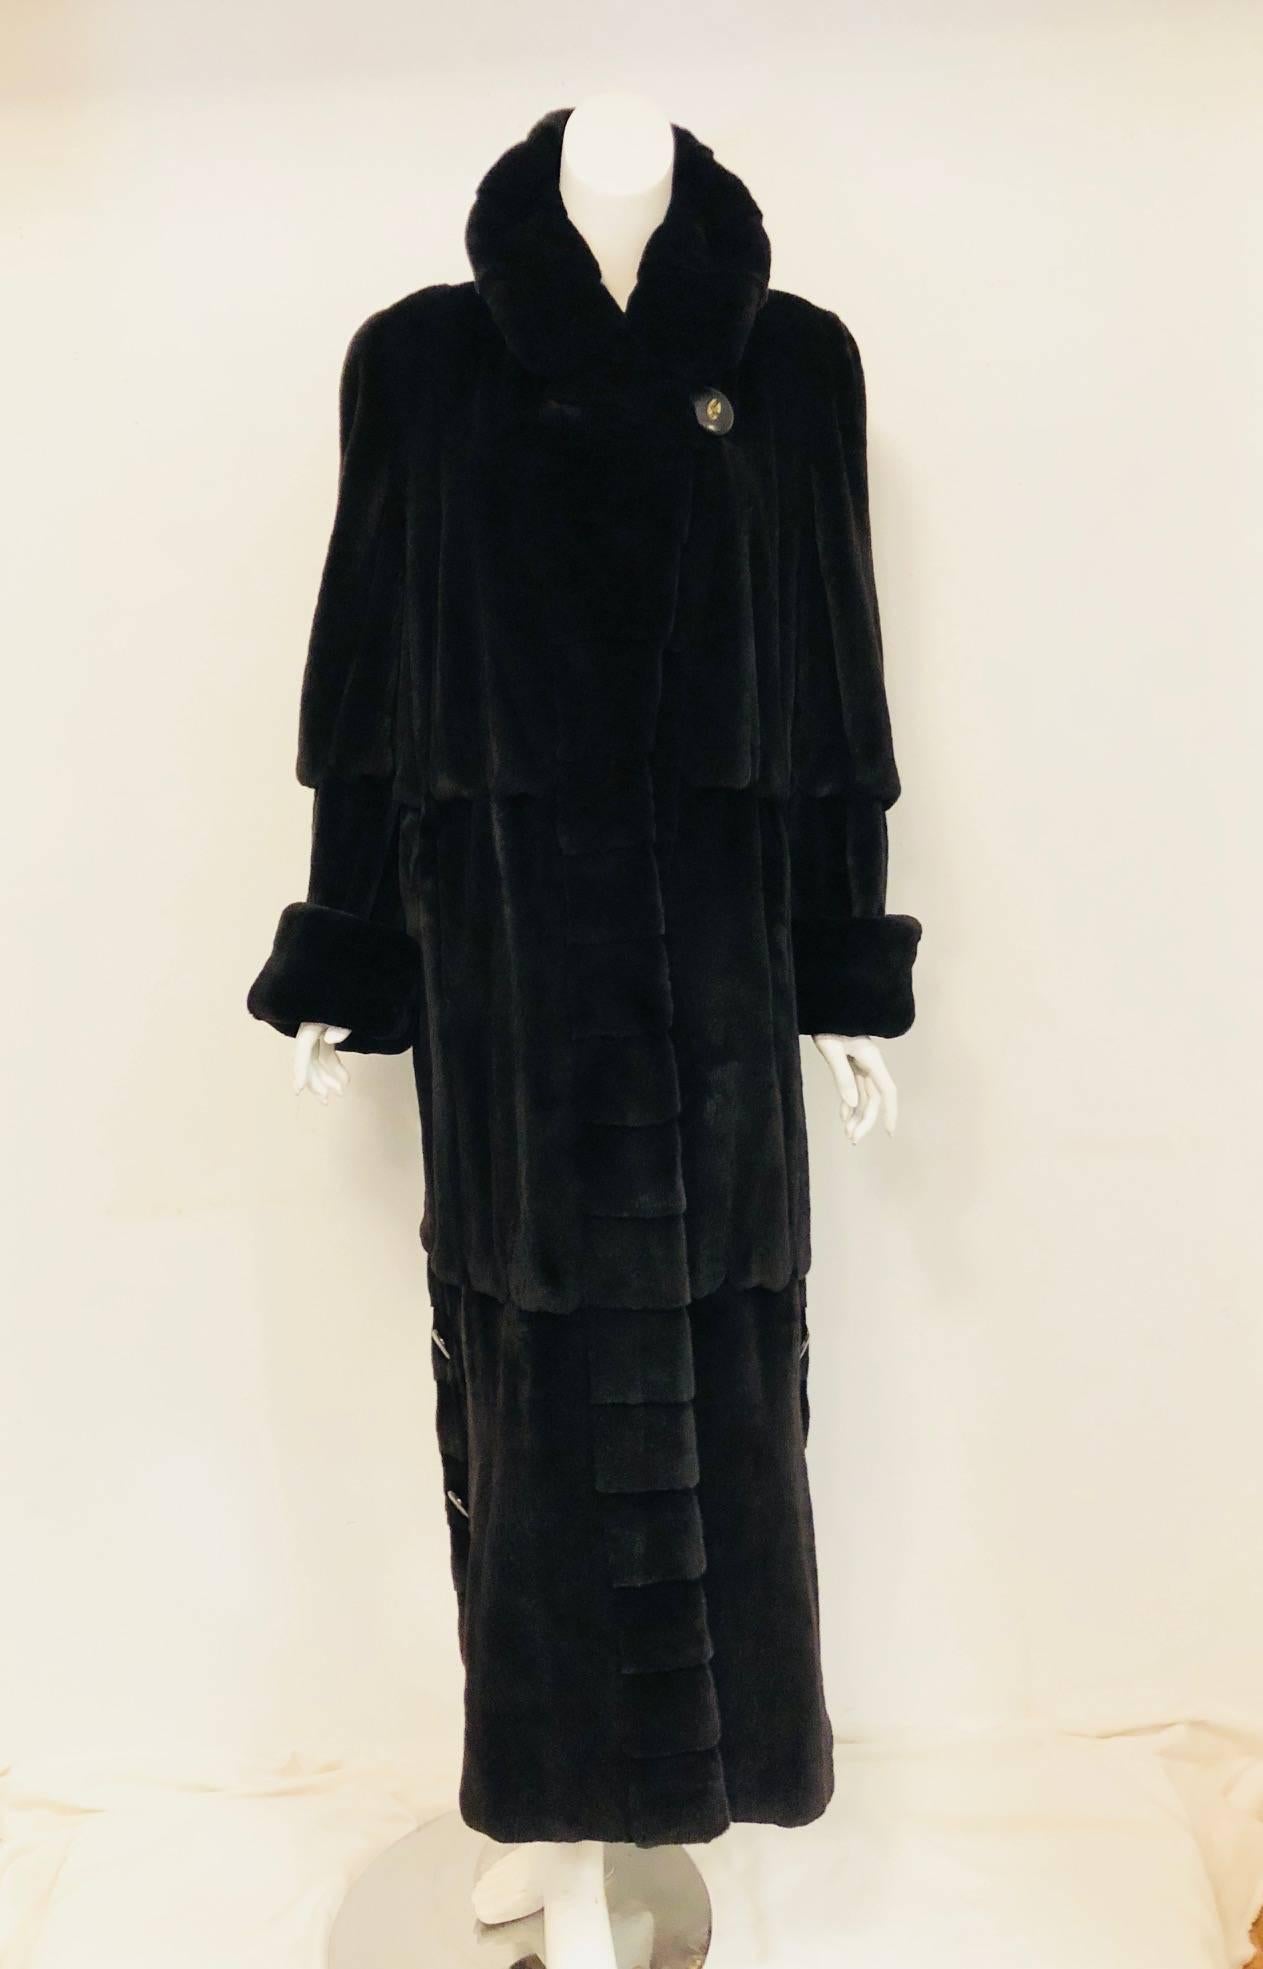 Marshall Fields luxurious  black sheared mink coat with 3 tier bands of vertical pelts creates a ruffle effect.  This coat has a slit at each side at the bottom of the coat with 2 acrylic and brass decorated buttons for closure.  The round collar